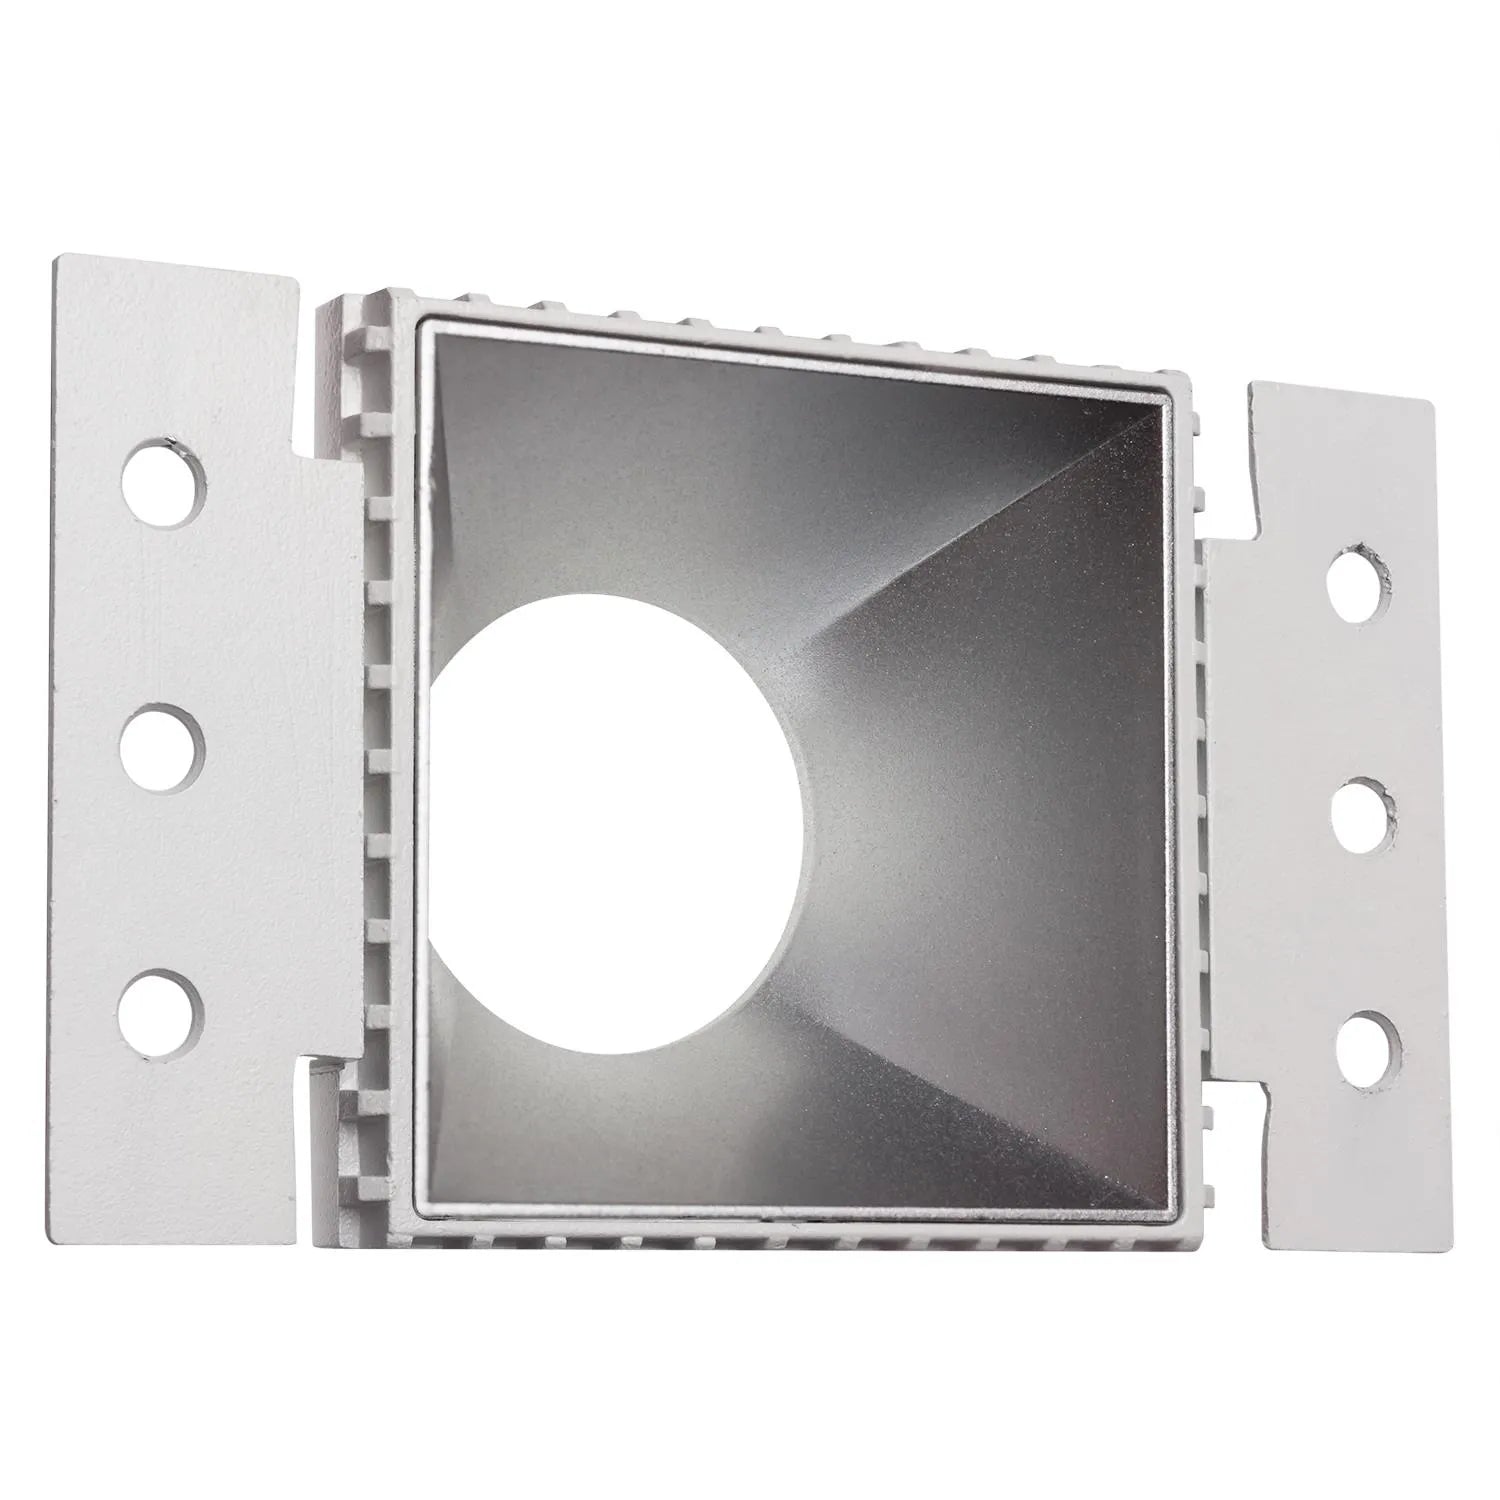 Westgate LRD-TL-10W-40K-4S-HZ LED 4" Round Architectural Trimless Recessed Light Residential Lighting - Matte Silver